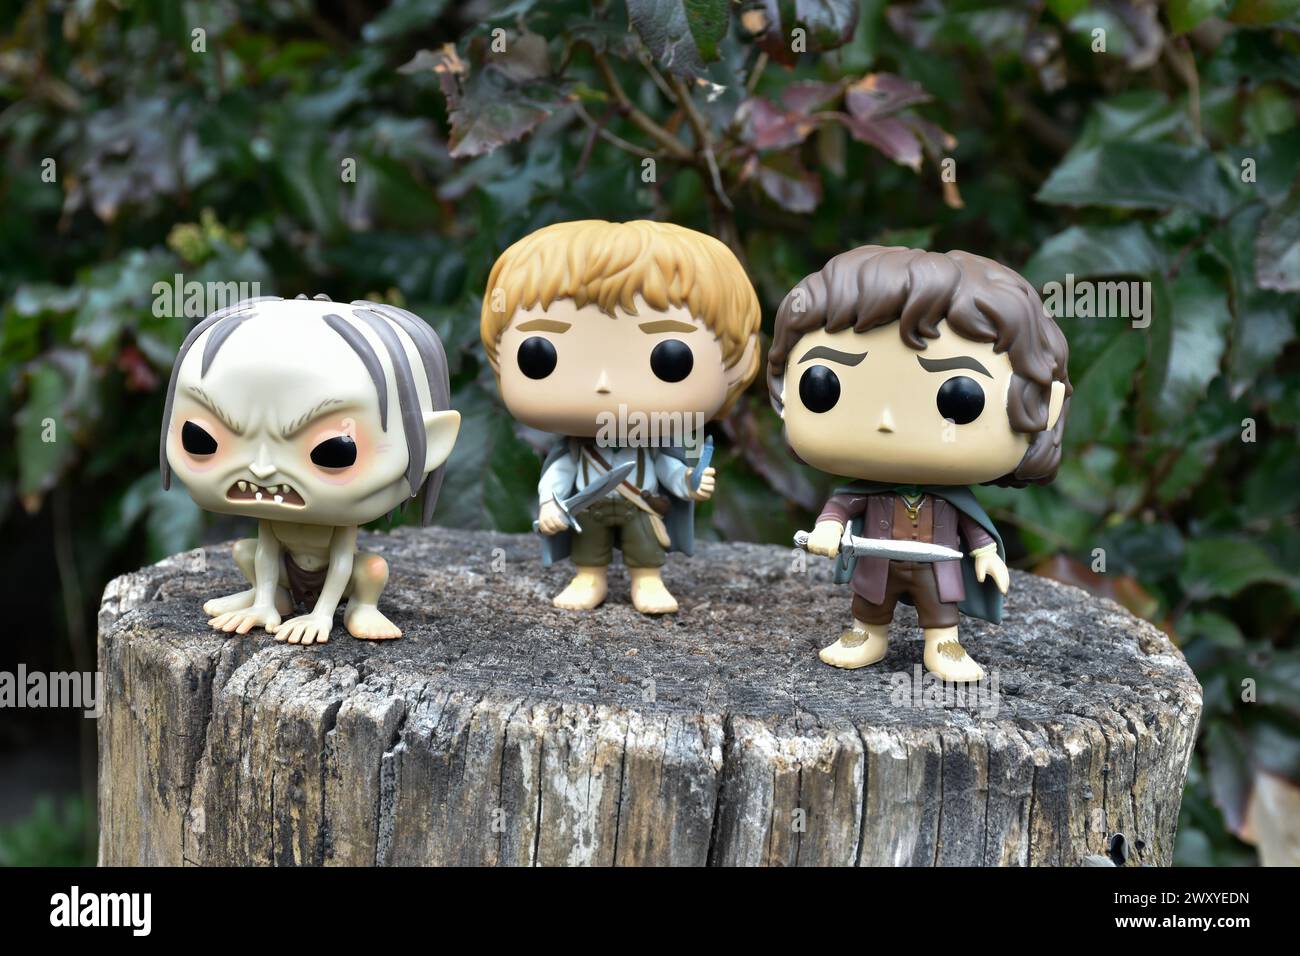 Funko Pop action figures of Gollum, Sam and Frodo hobbits from fantasy movie The Lord of the Rings. Dark forest, tree stump, green leaves. Stock Photo